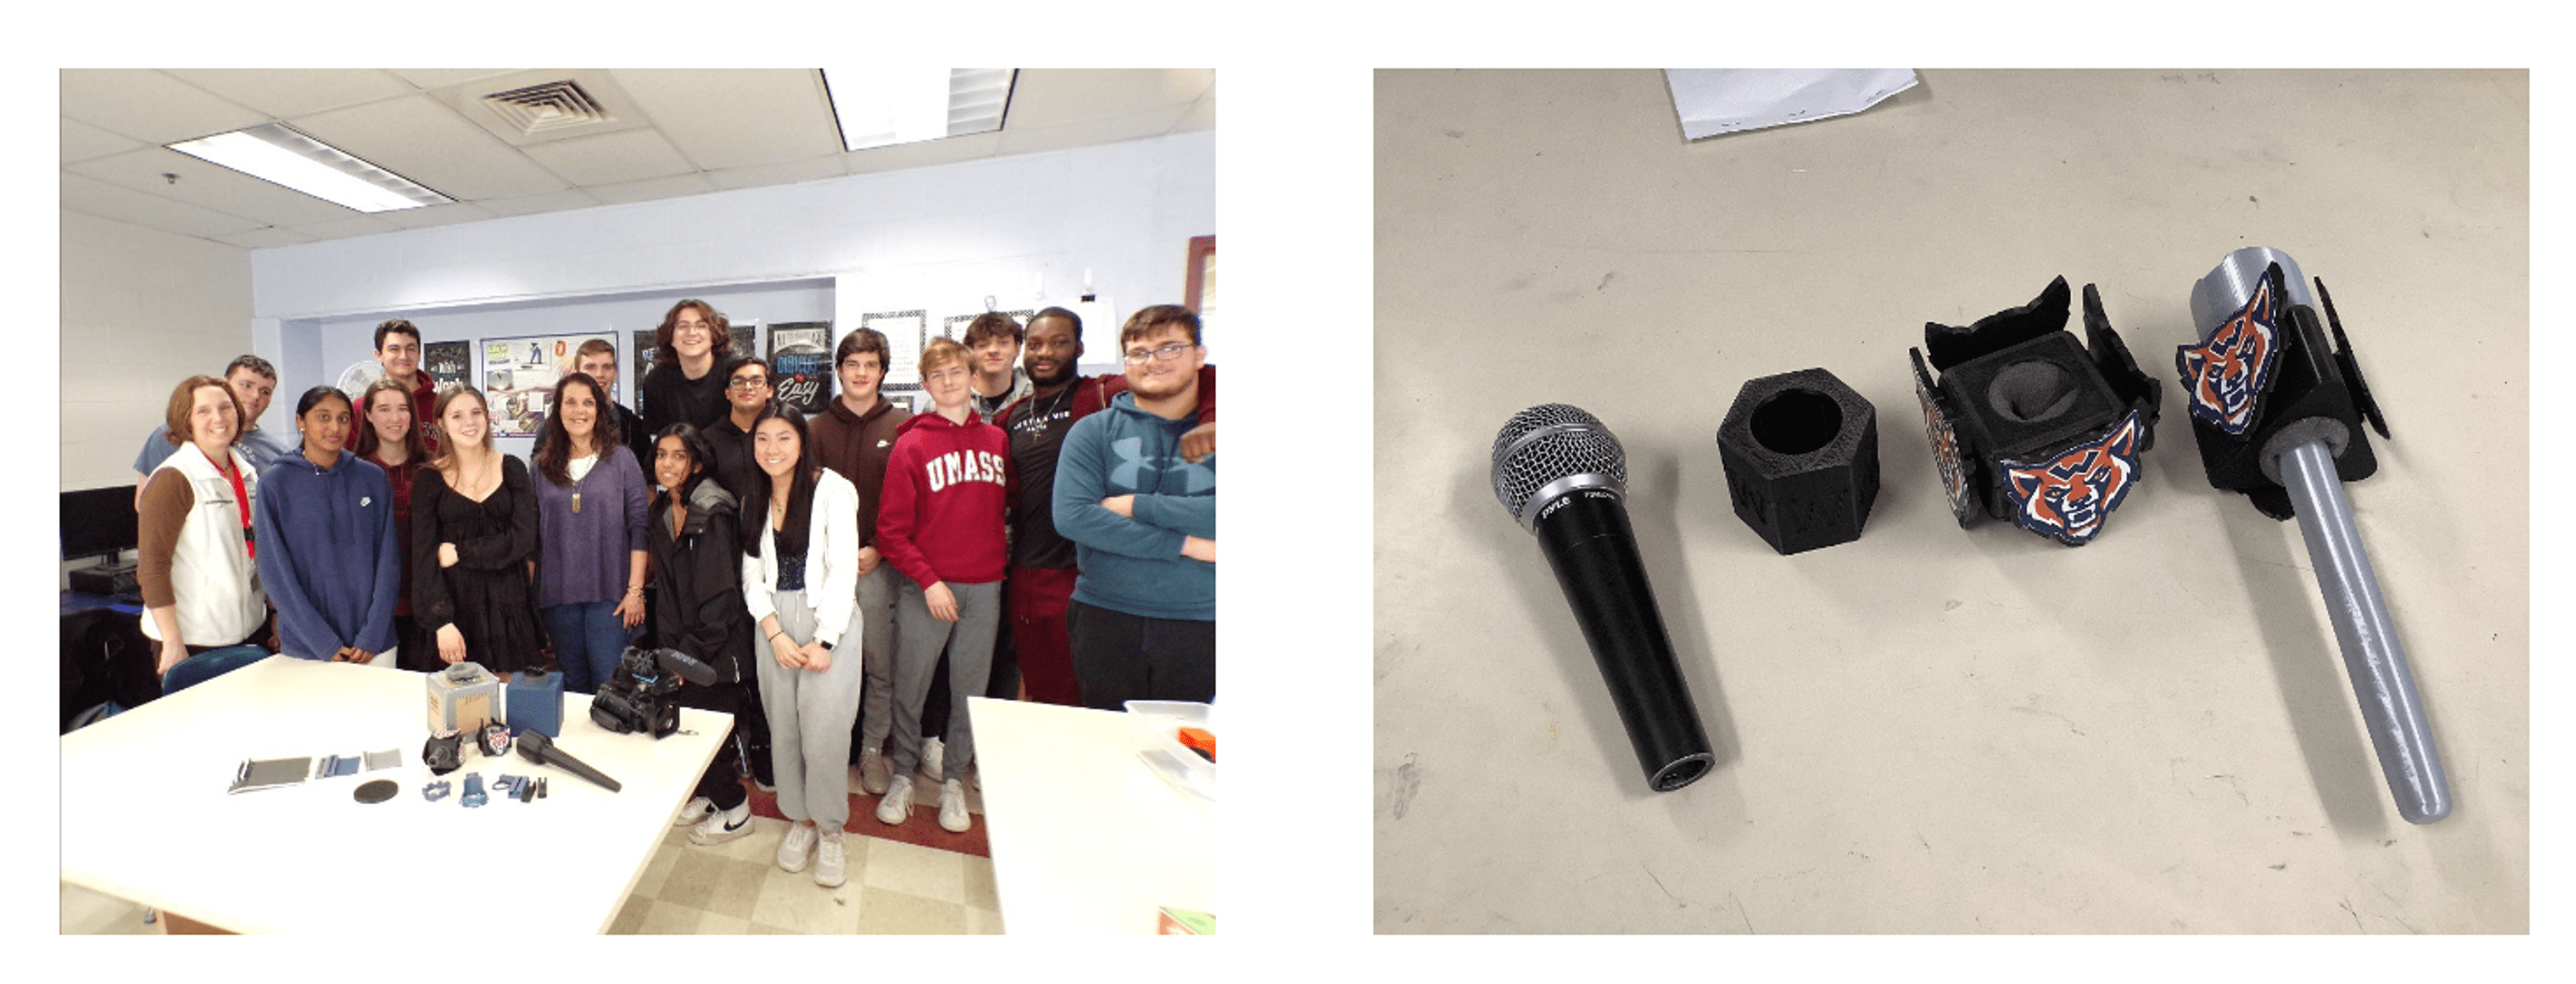 collection of two images of students gathering and microphones on a table